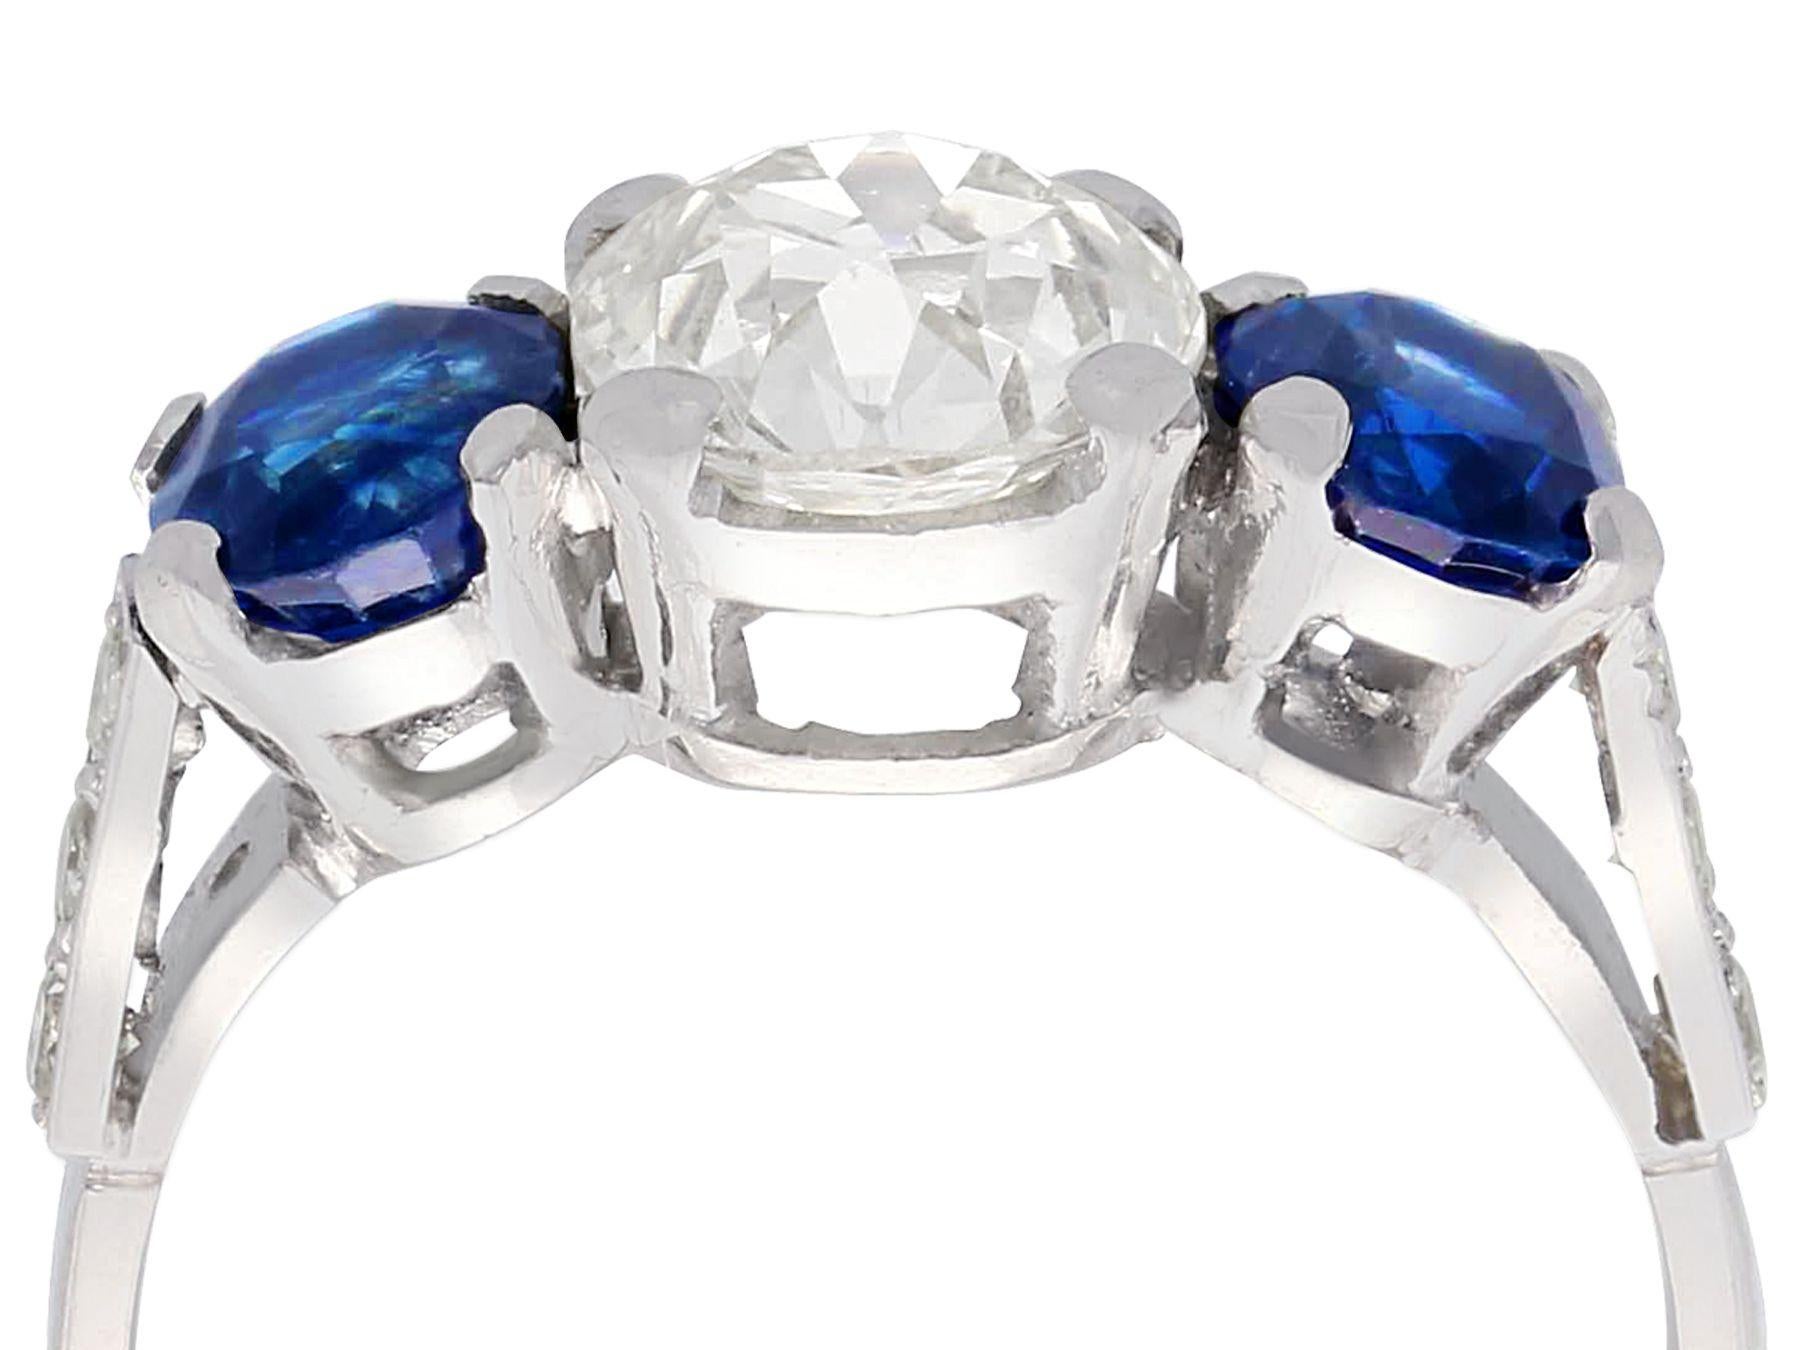 A stunning, fine and impressive 1.62 carat sapphire and 1.86 carat diamond, platinum trilogy ring; part of our diverse sapphire jewelry and estate jewelry collections.

This stunning, fine and impressive sapphire and diamond trilogy ring with